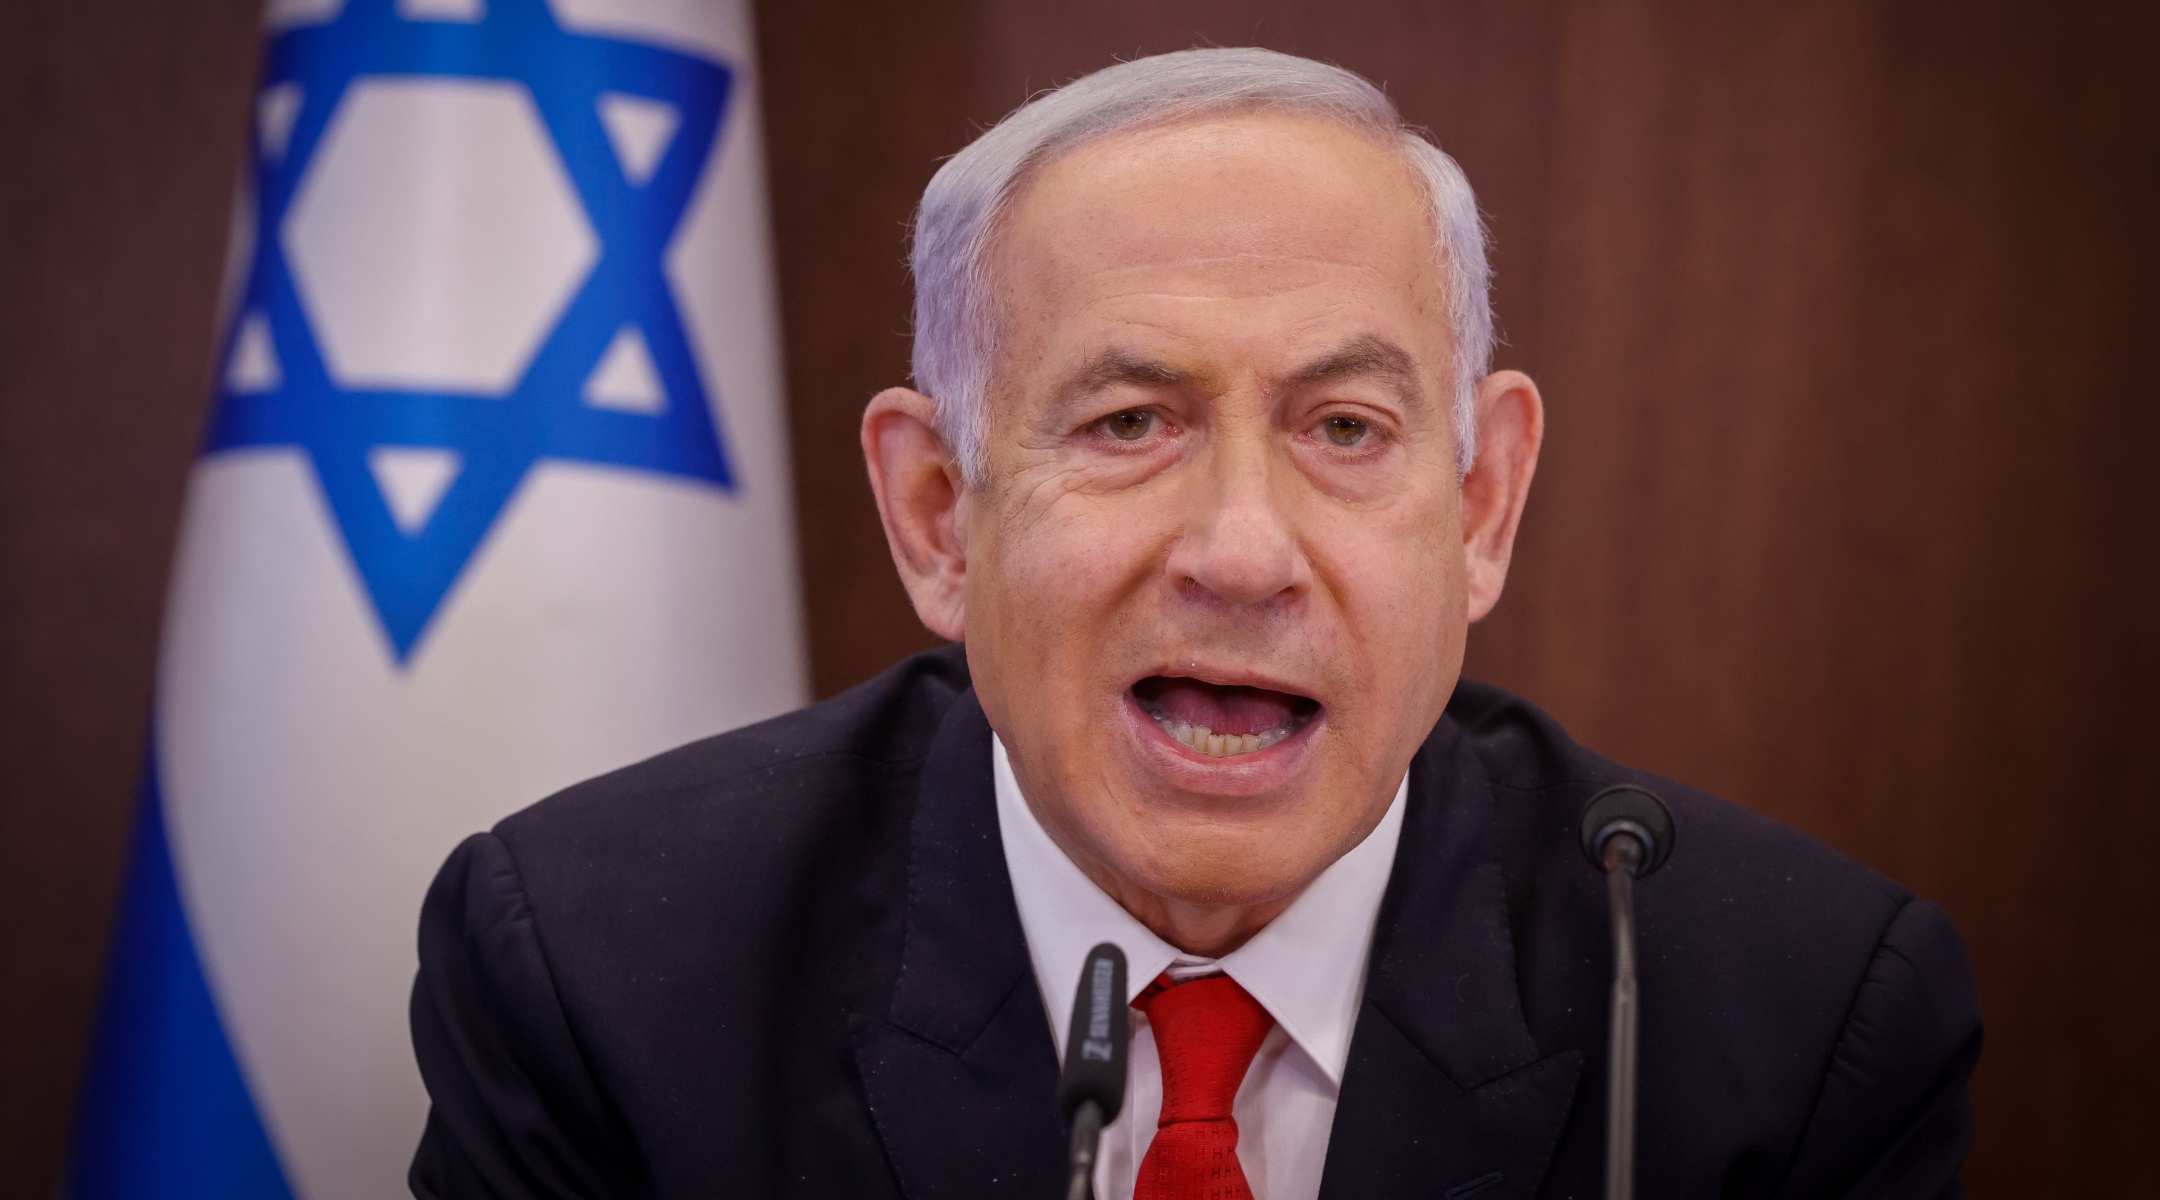 Israeli Prime Minister Benjamin Netanyahu leads a cabinet meeting on the state budget, at the Prime Minister’s Office in Jerusalem on March 5, 2023. (Marc Israel Sellem/POOL)